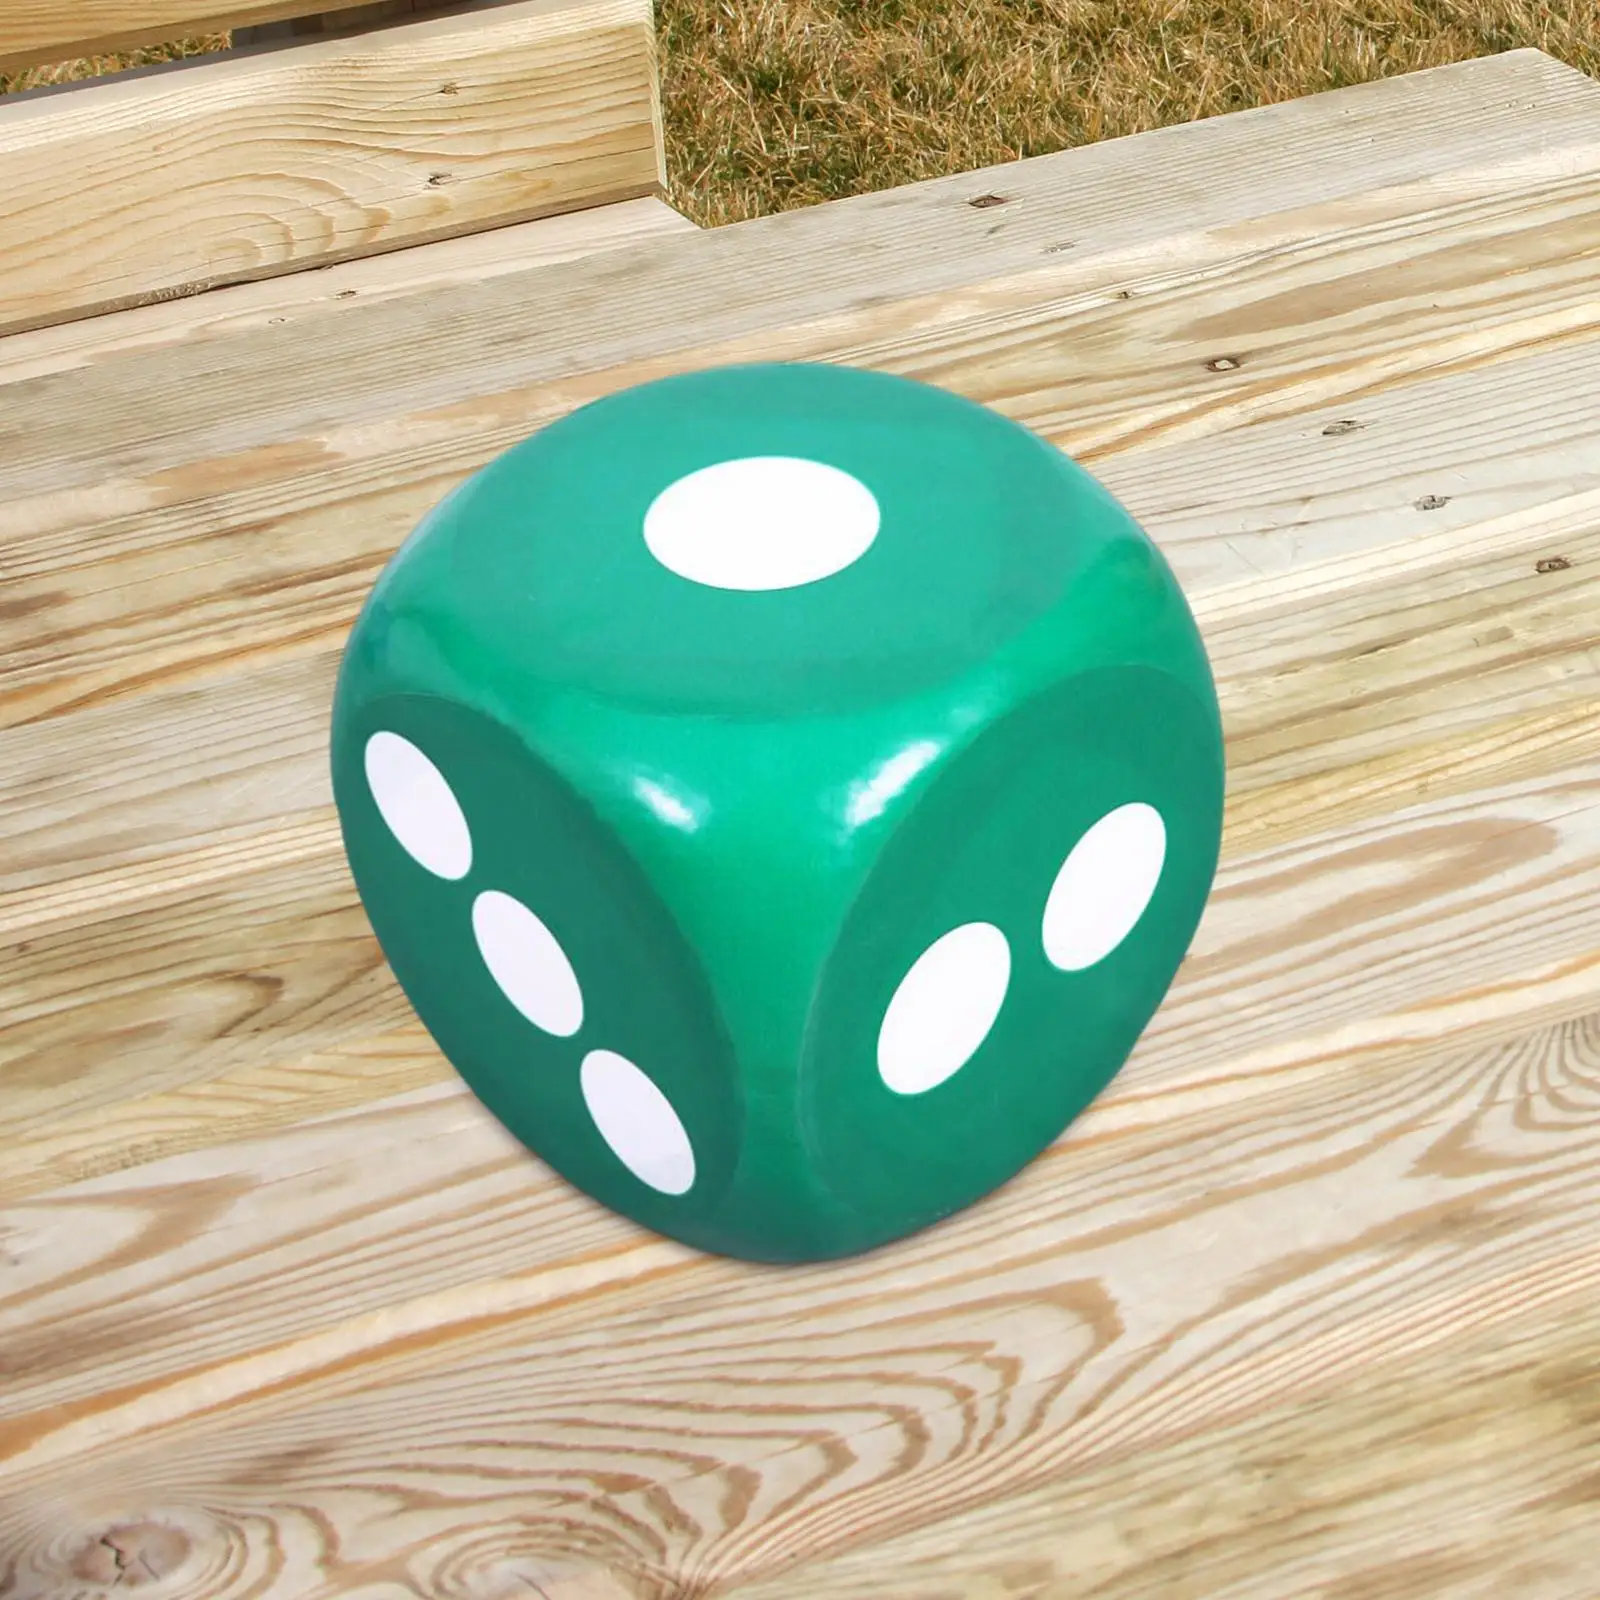 Foam Dot Dice with Number Dots Building Toys Big Square Blocks Dice Cubes Block for Kids Boys Girls Party Favors and Supplies